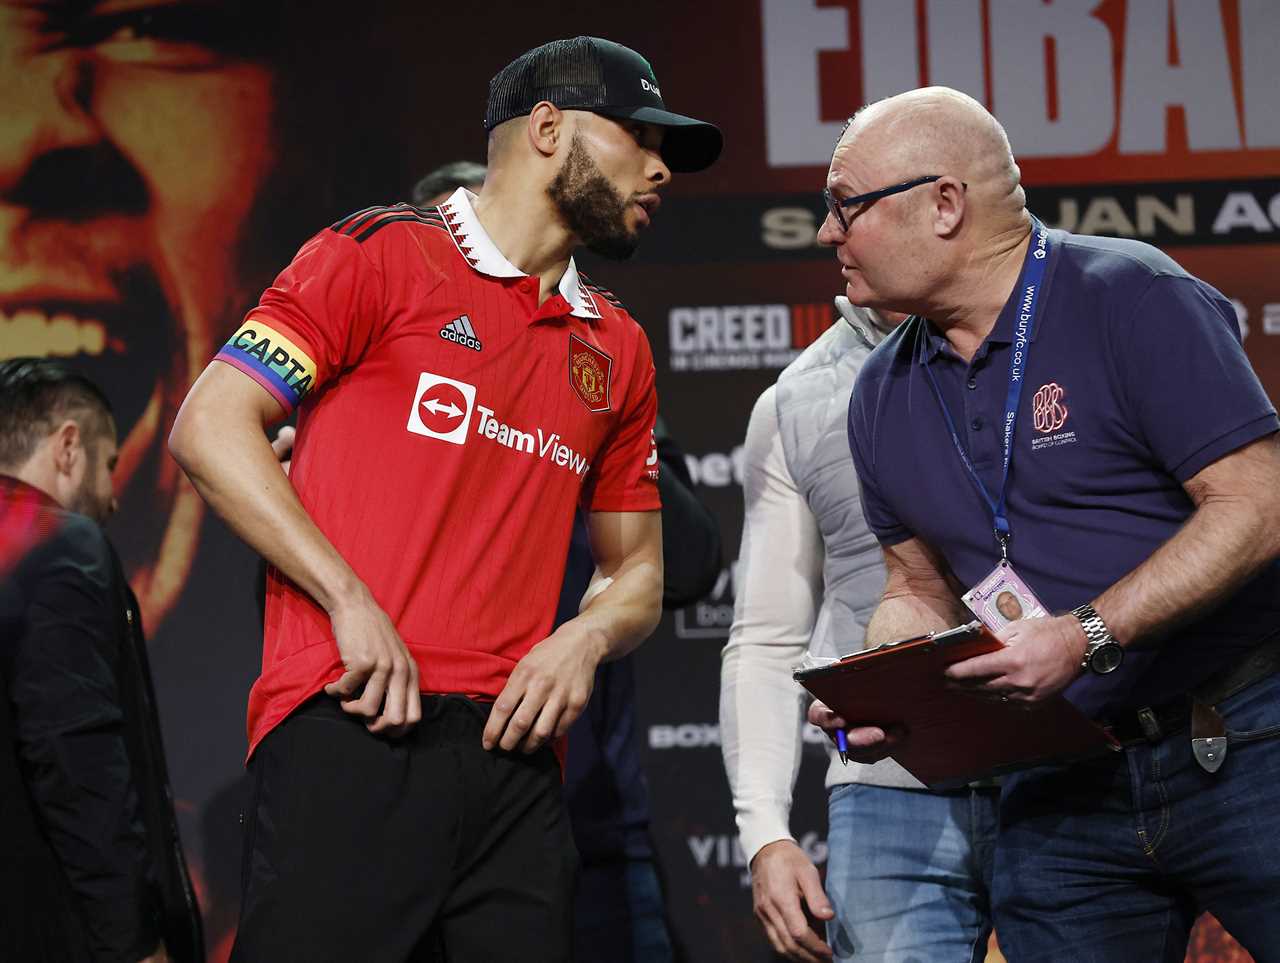 After homophobia row, Chris Eubank Jr. wears a Man Utd shirt and weighs in with Liam Smith.